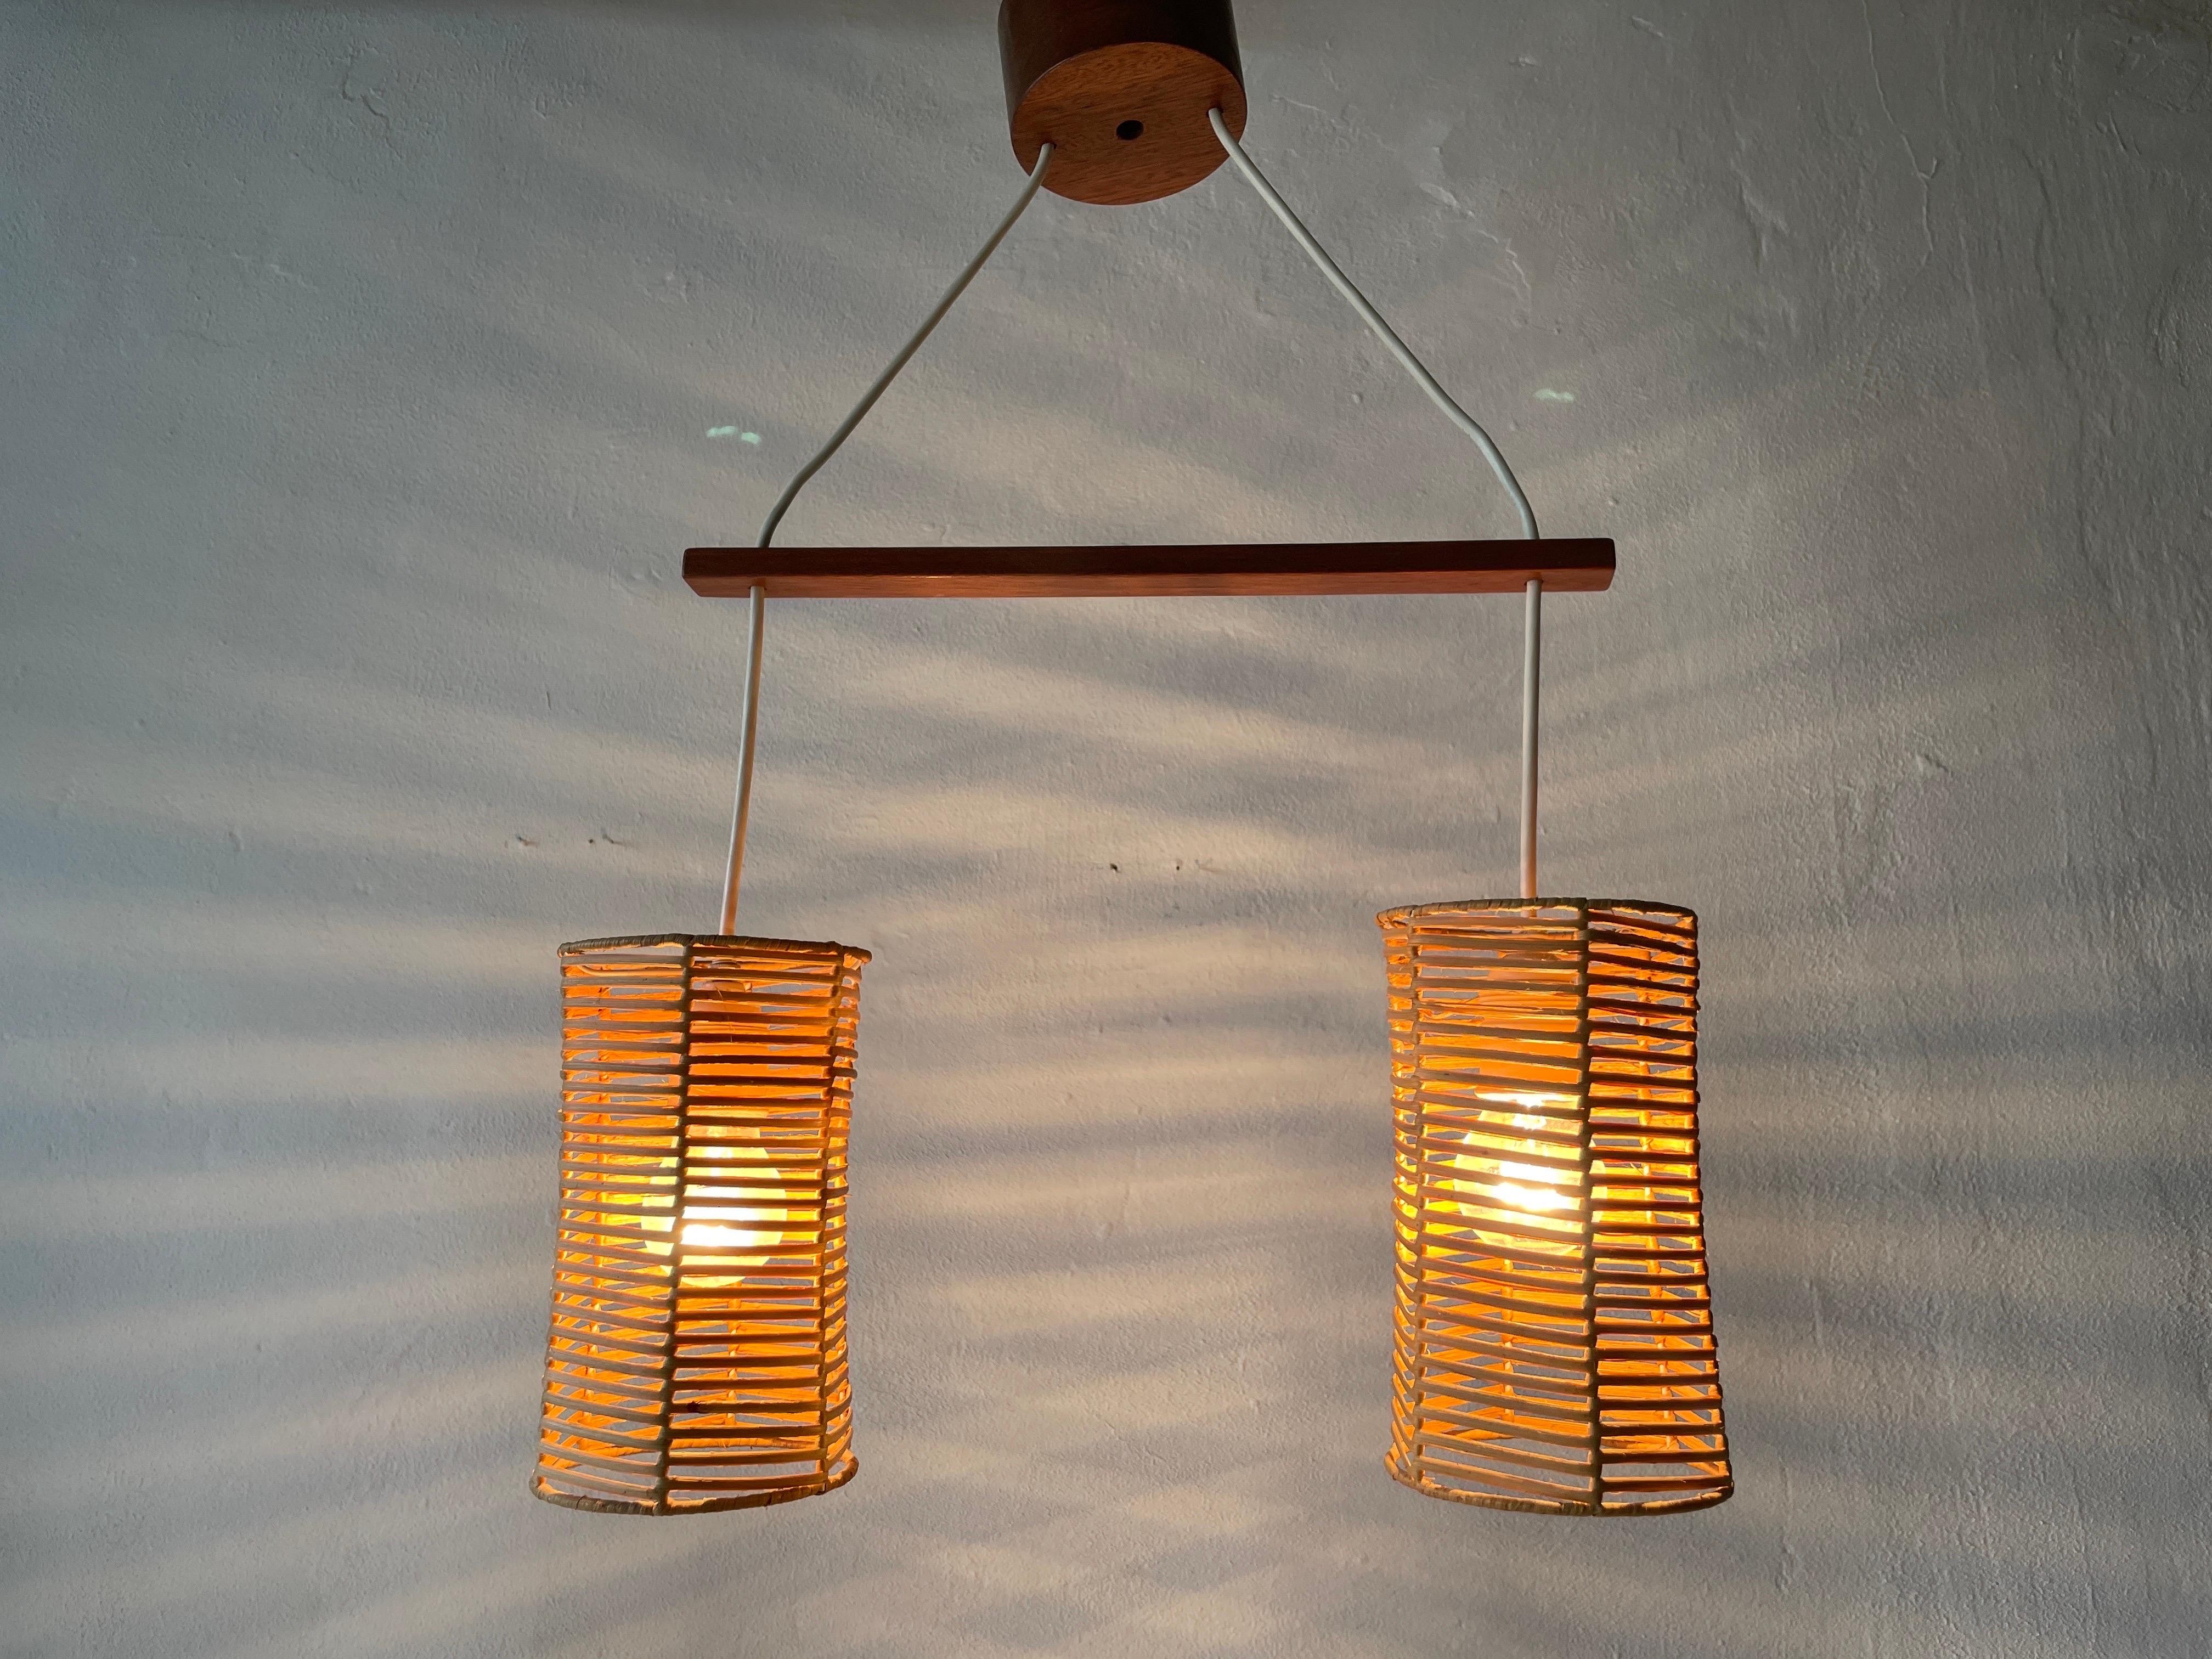 Double Shade Wicker and Wood Pendant Lamp, 1960s, Germany For Sale 1